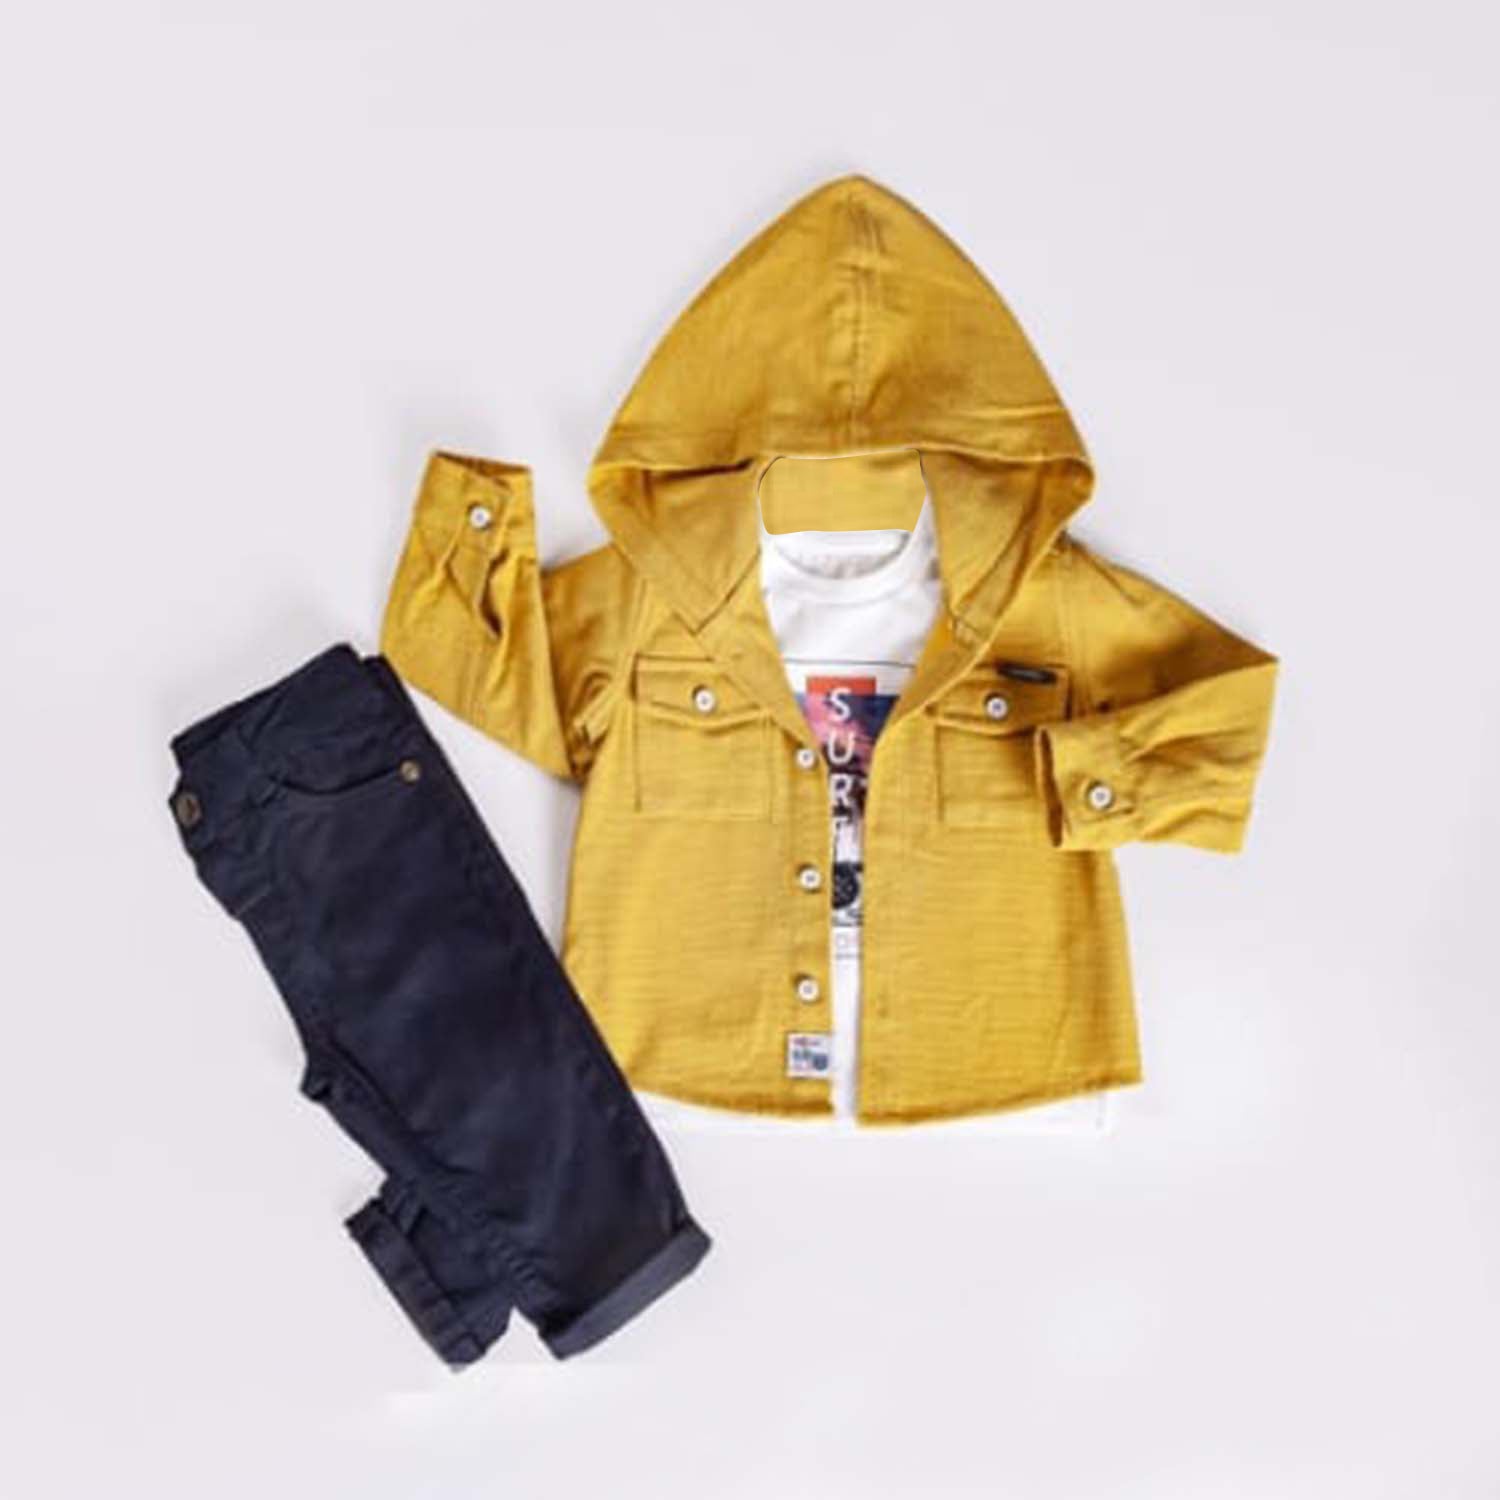 Little Boys' Comfortable and Stylish Hoodie Jacket, Pants and T-Shirt 3-Piece Set - 0